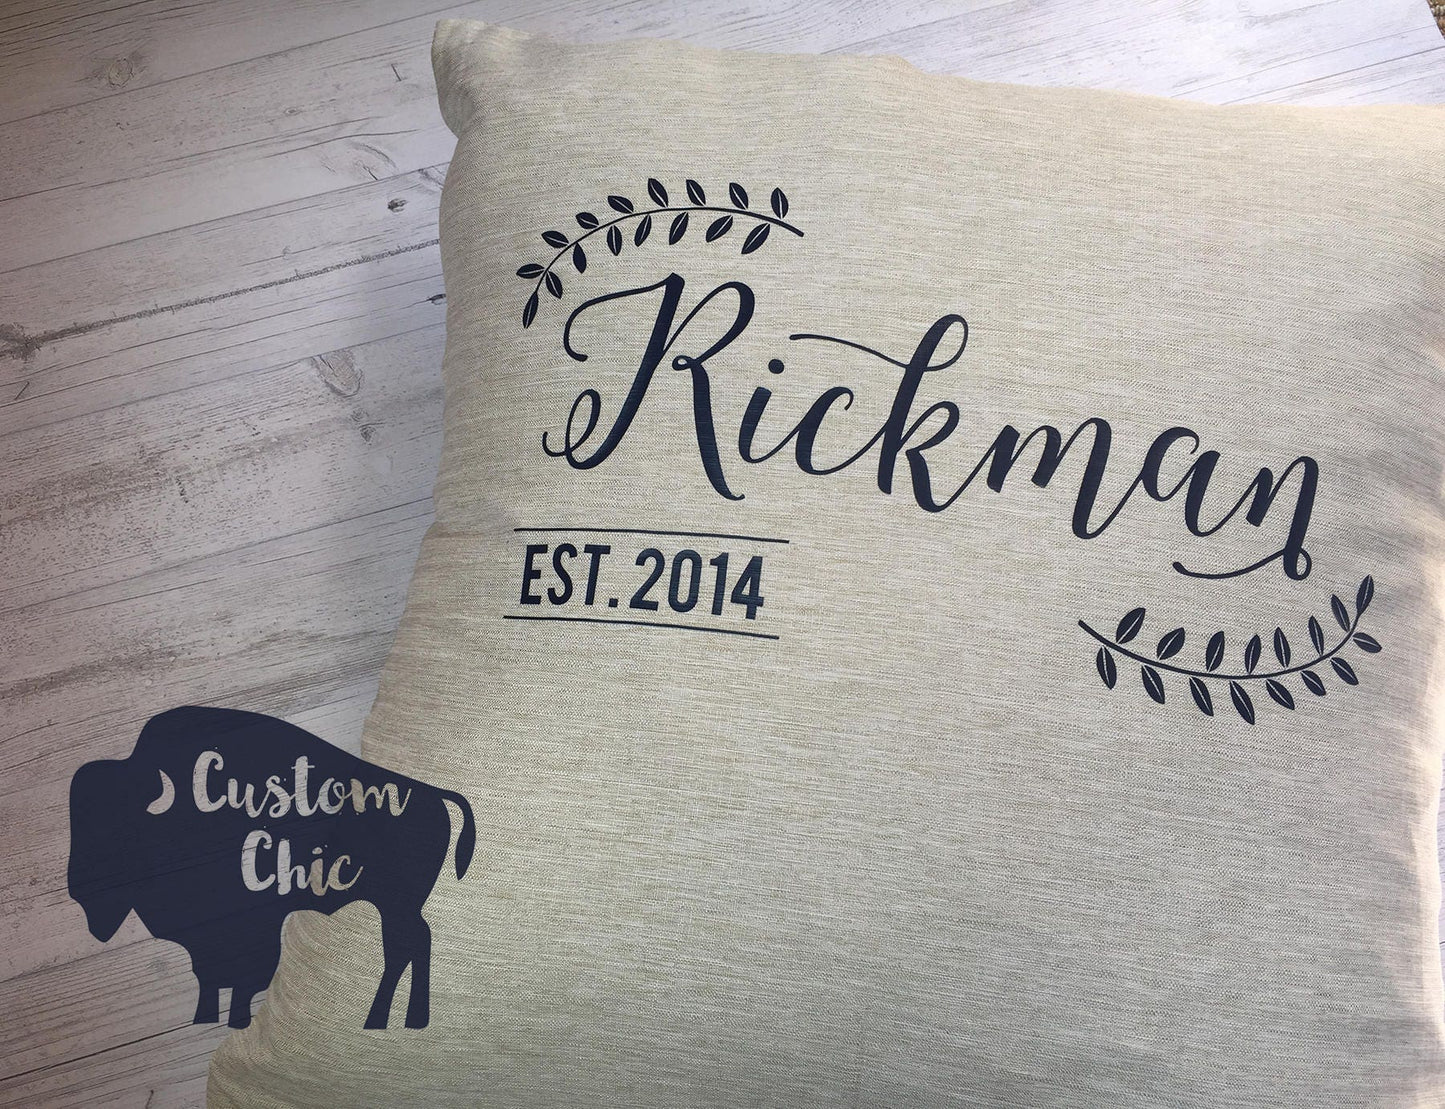 Personalized Throw Pillows